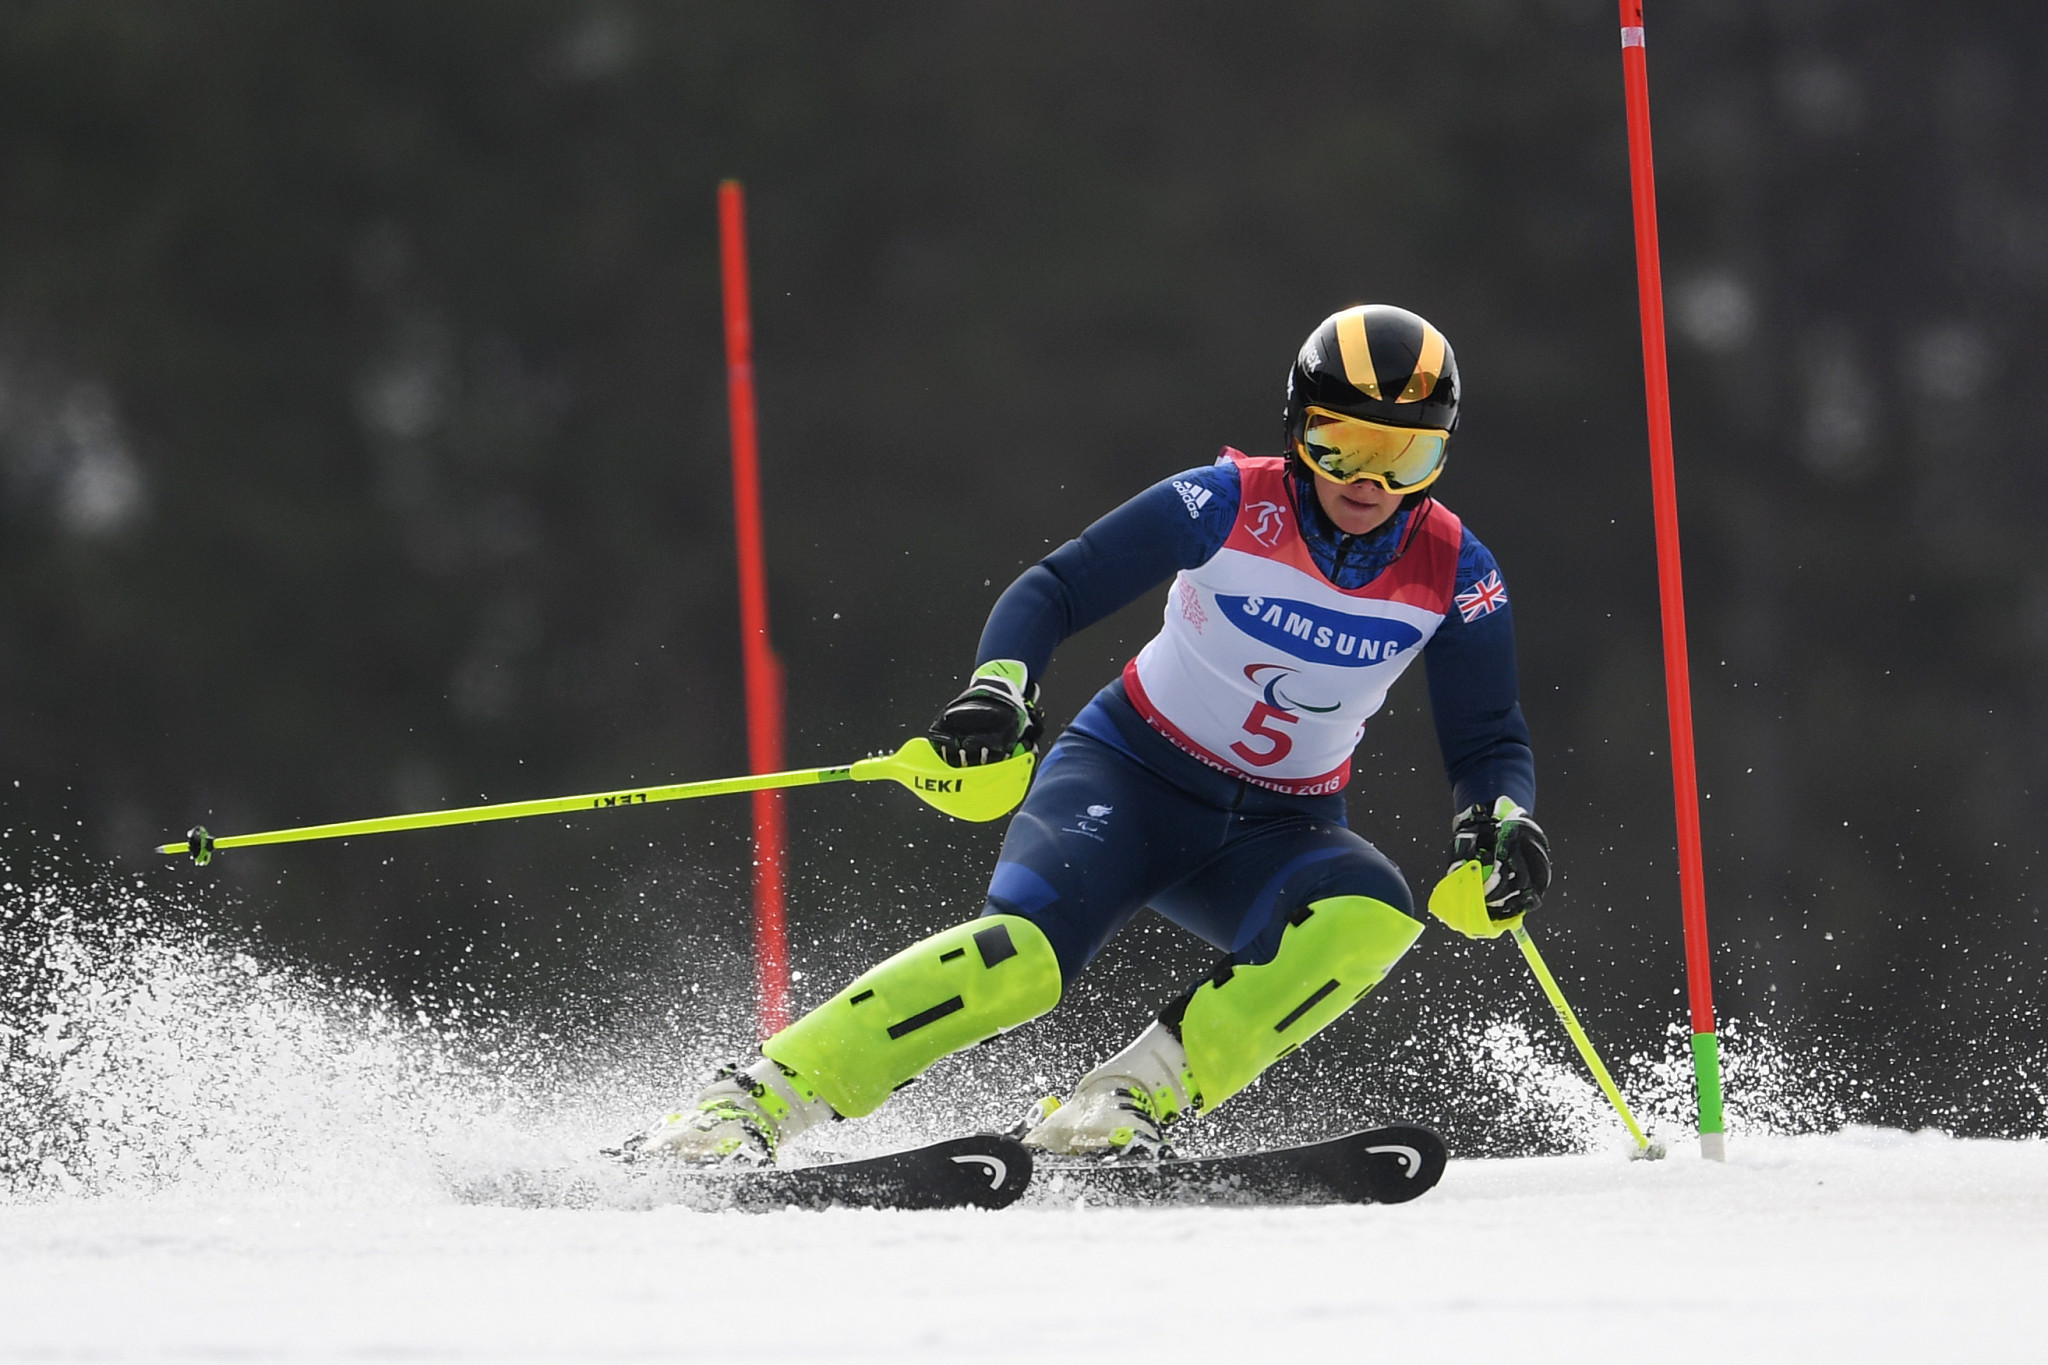 Millie Knight won three Para Alpine skiing medals at Pyeongchang 2018, and has been named as one of 10 winners of the Nicholas Cheffings Para Athlete Bursary ©Getty Images